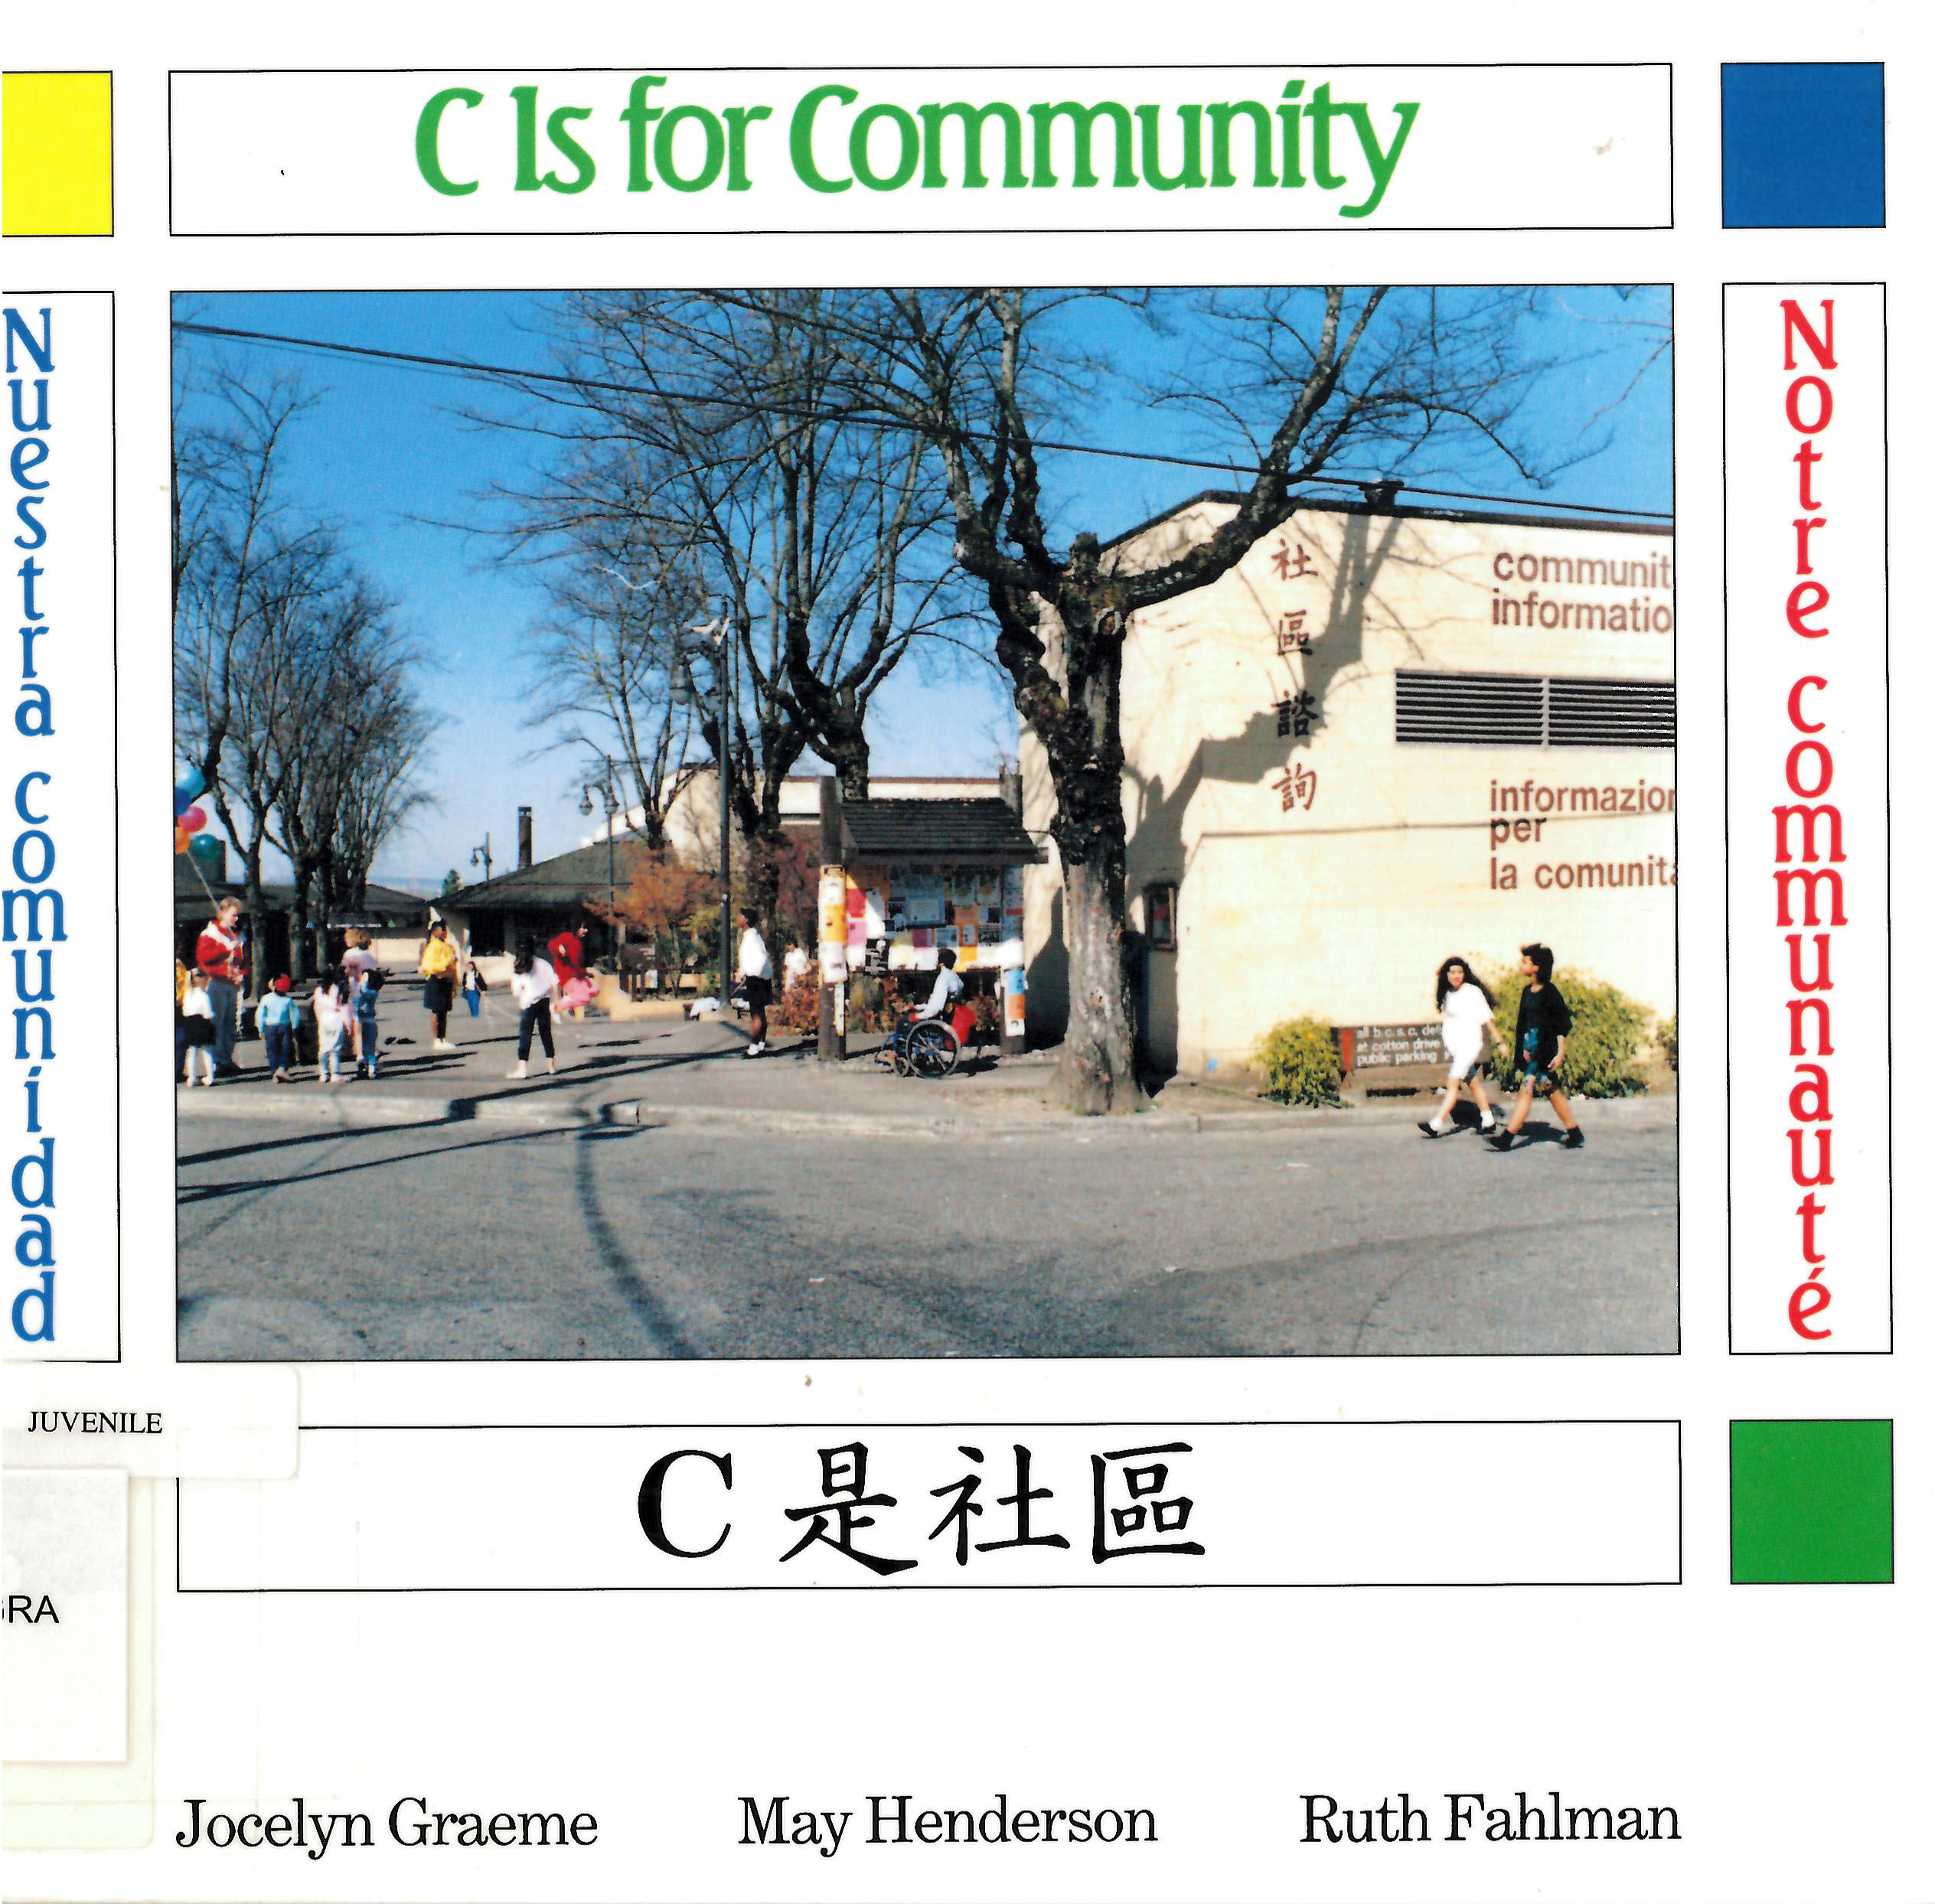 C is for community